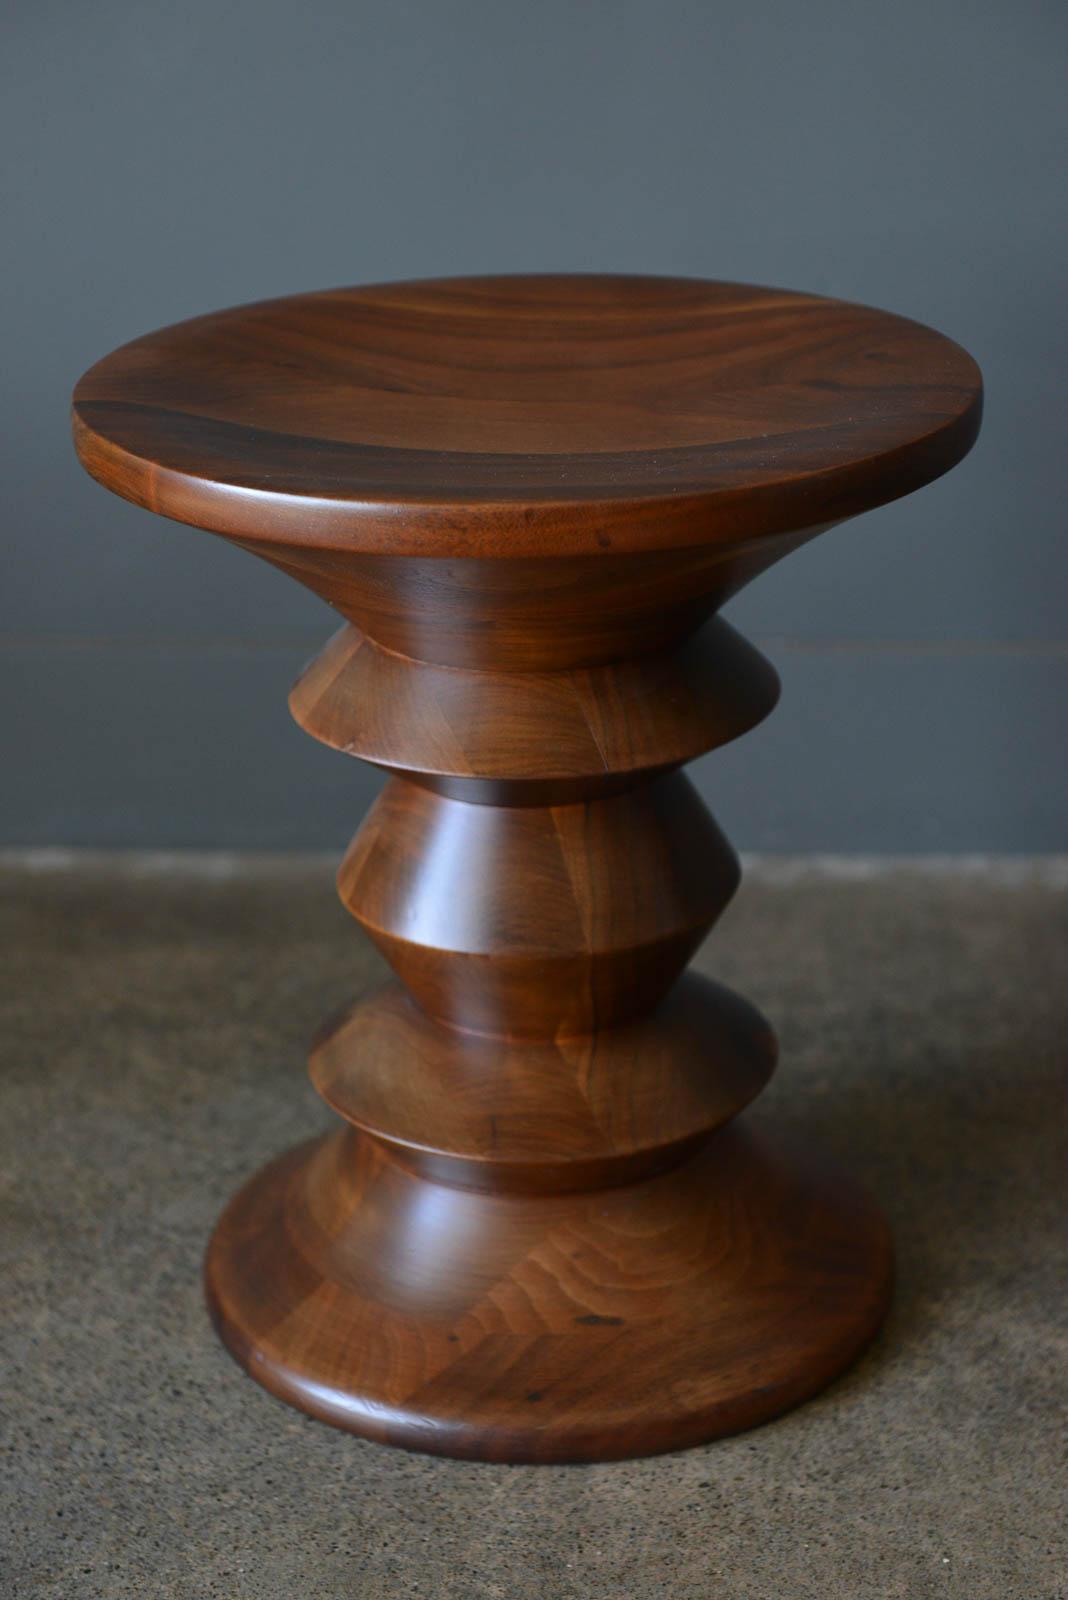 Early Charles Eames Time Life Stool Model C. Beautiful walnut parquet in excellent original condition, this piece was purchased from the original owner who was a corporate executive in Los Angeles for Knoll for 35+ years. Beautiful walnut grain and